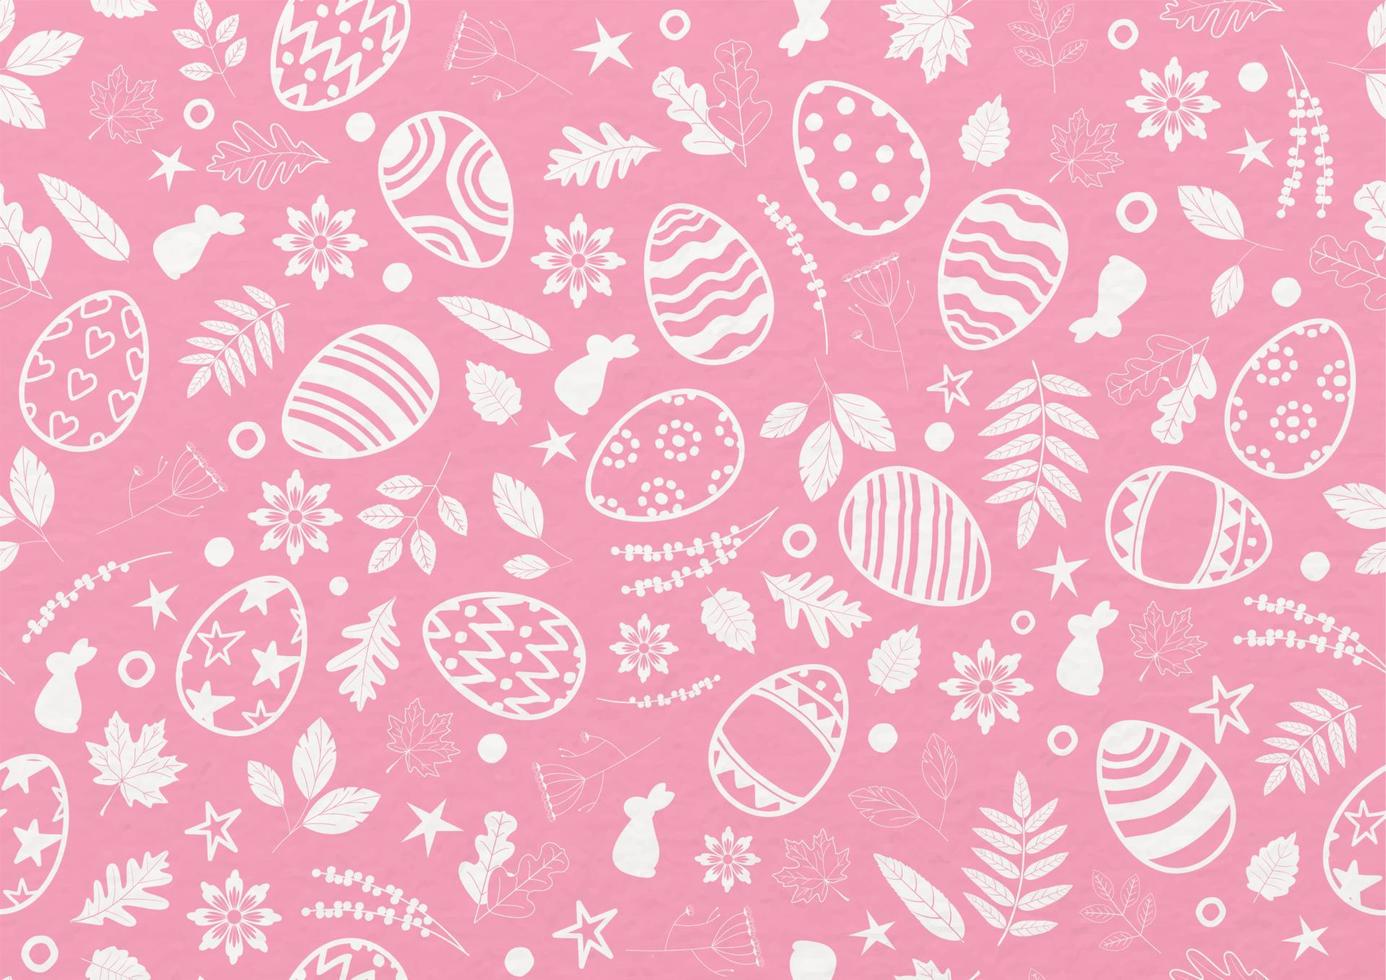 Closeup and crop Easter eggs with decorate nature in white color and doodle style on pink paper pattern background. Easter eggs hunt wallpaper and seamless in vector design